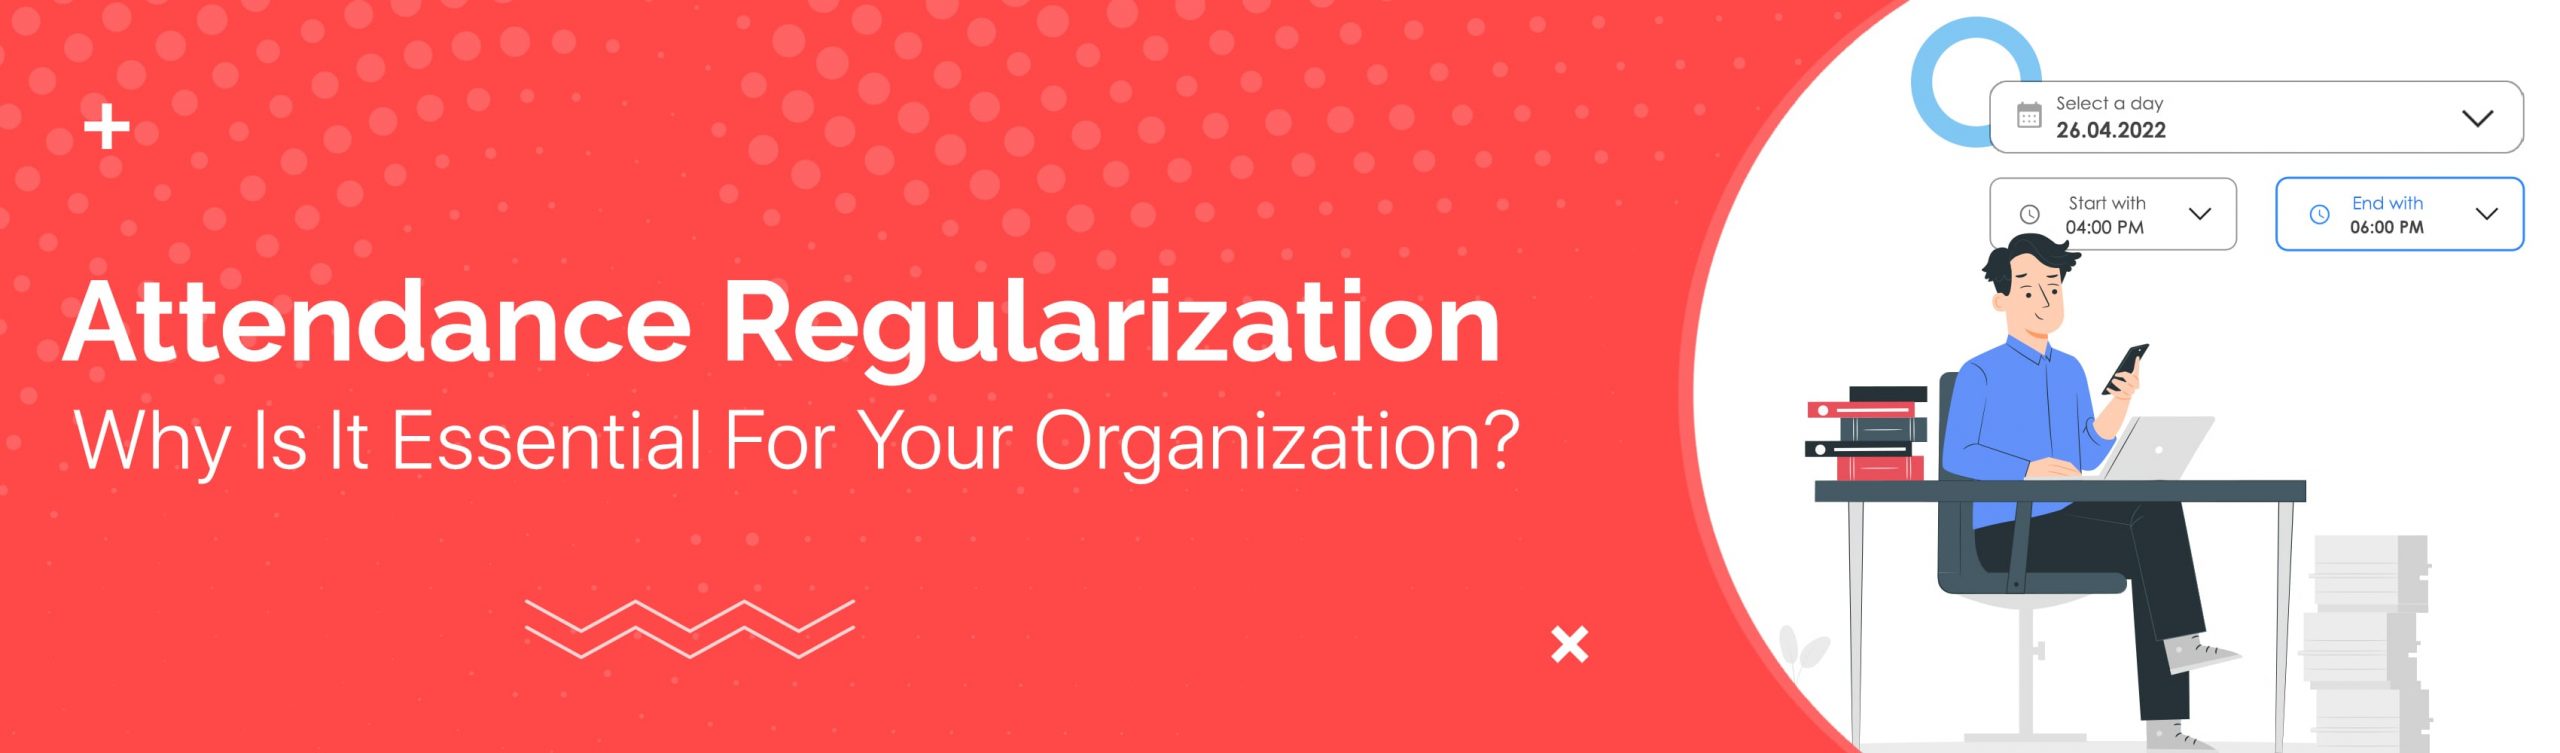 Attendance Regularization: What It Is and Why Is It Essential For Your Organization?